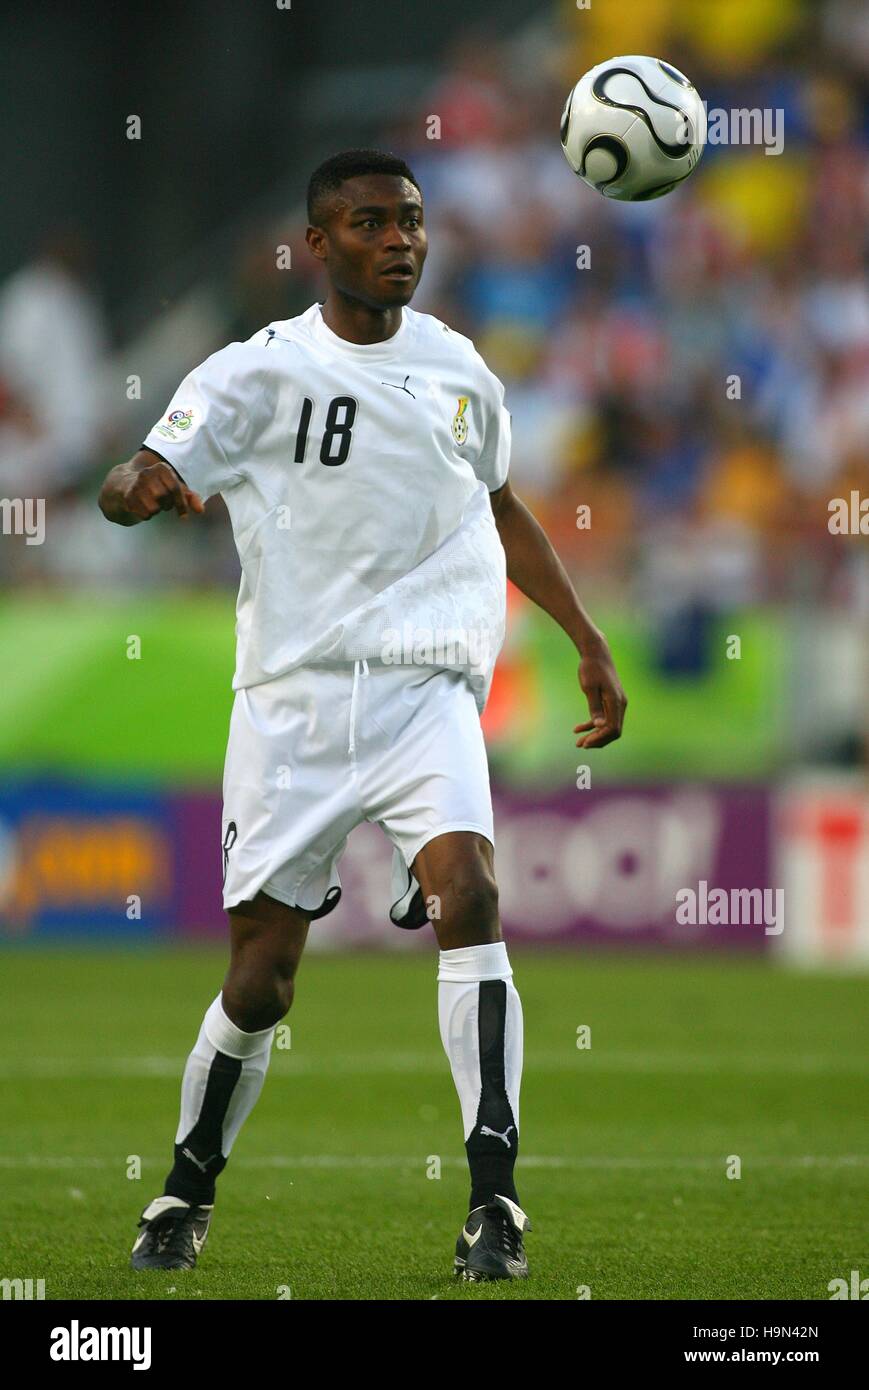 ERIC ADDO GHANA & PSV EINDHOVEN WORLD CUP HANNOVER GERMANY 12 June 2006 Stock Photo